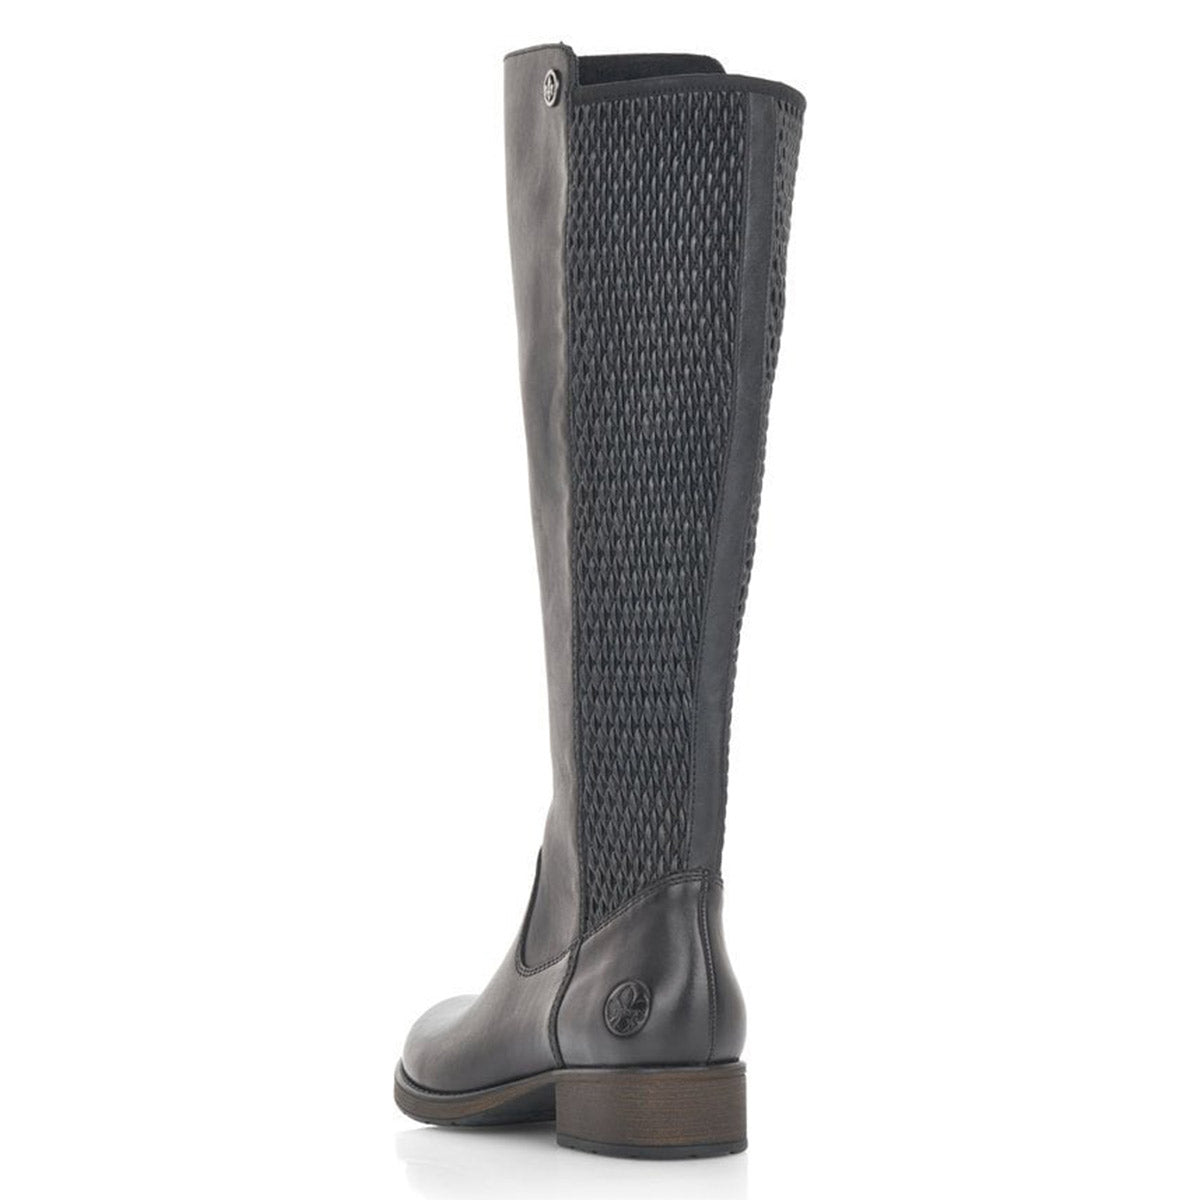 Rieker FAITH 91 black vegan leather riding boot with a textured, ribbed upper panel and circular emblem on the outer side, standing against a white background.